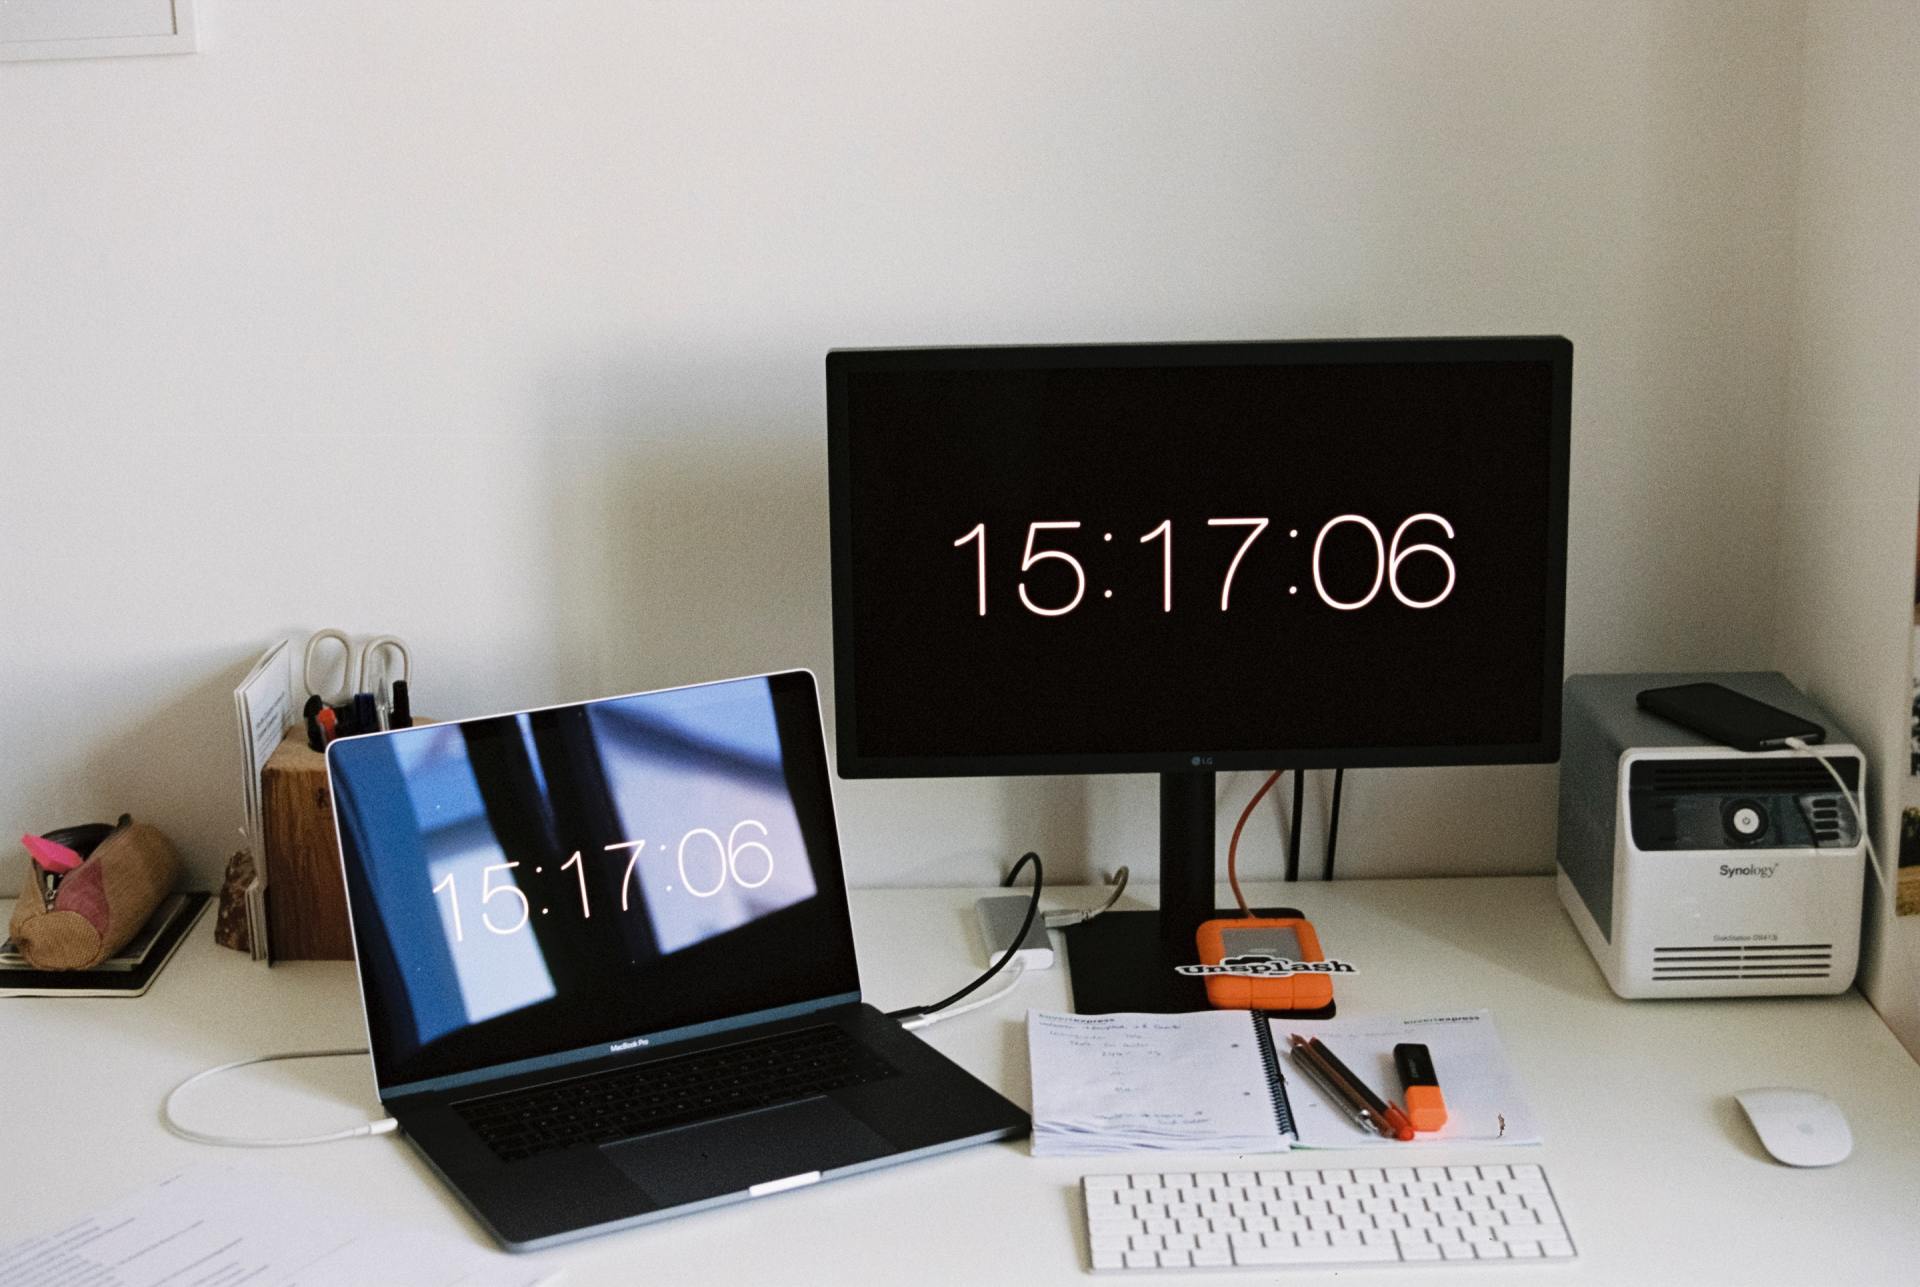 A computer monitor displays the time as 15:17:06